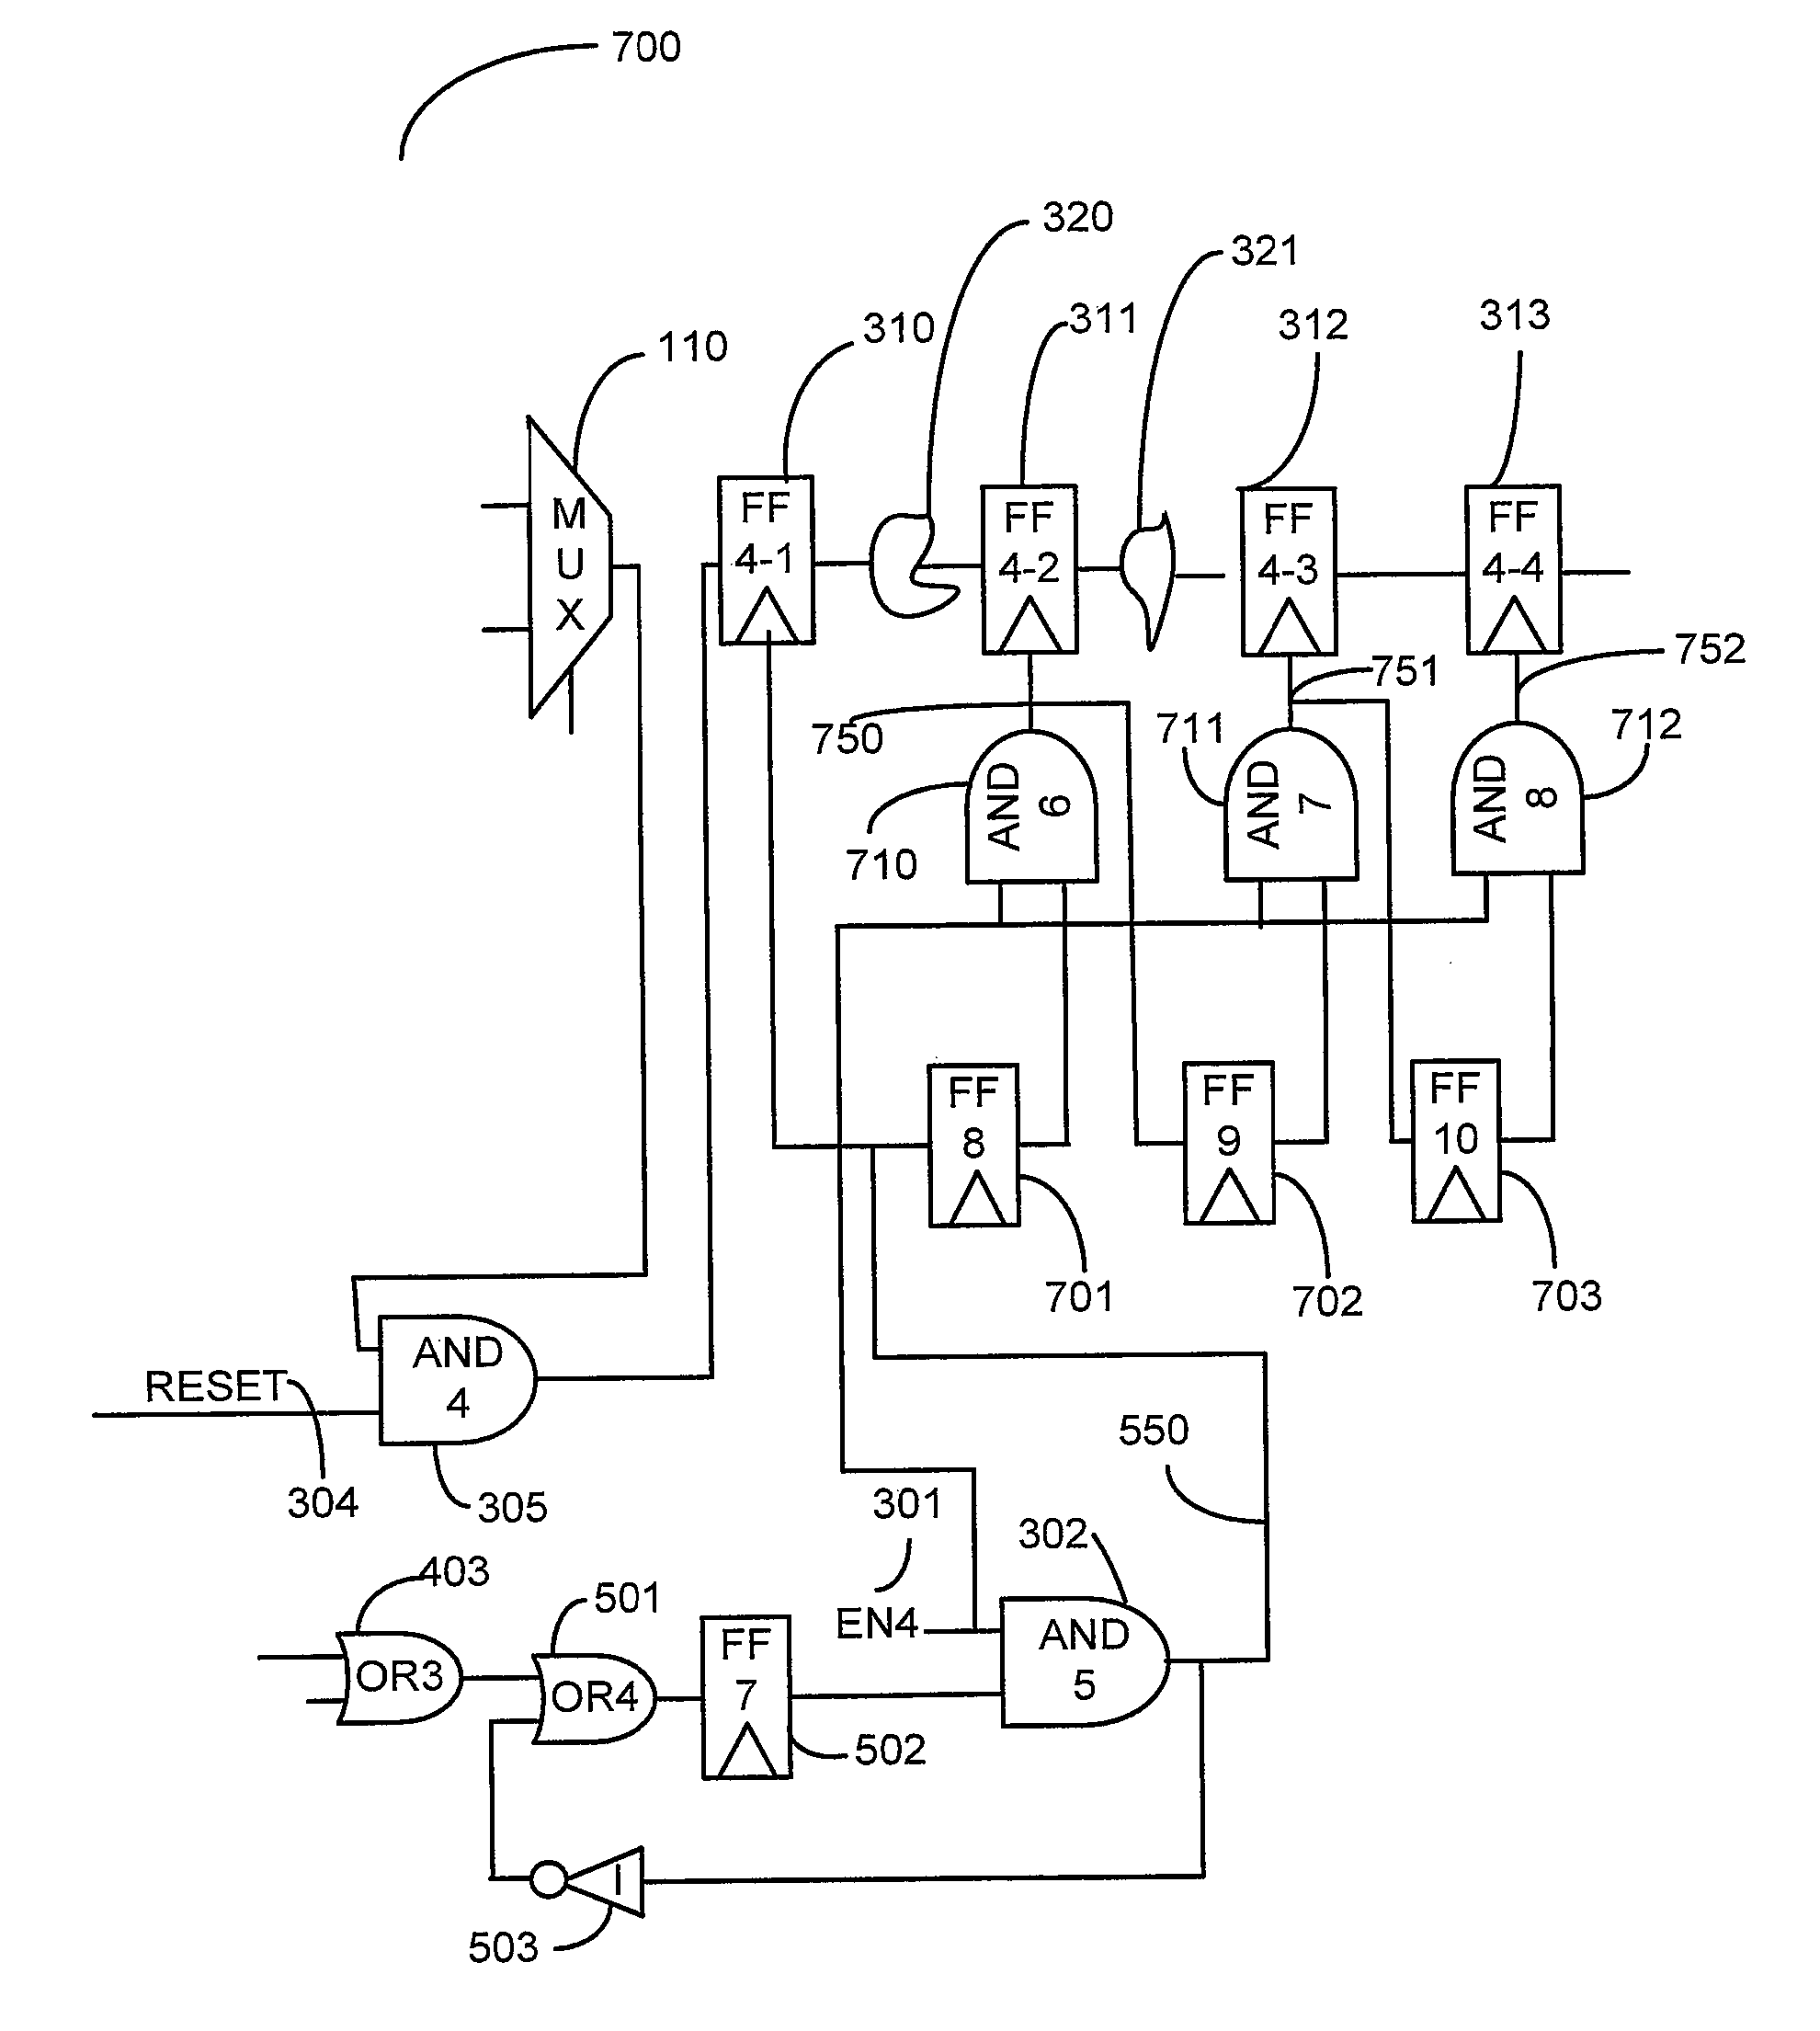 Sequential clock gating using net activity and xor technique on semiconductor designs including already gated pipeline design